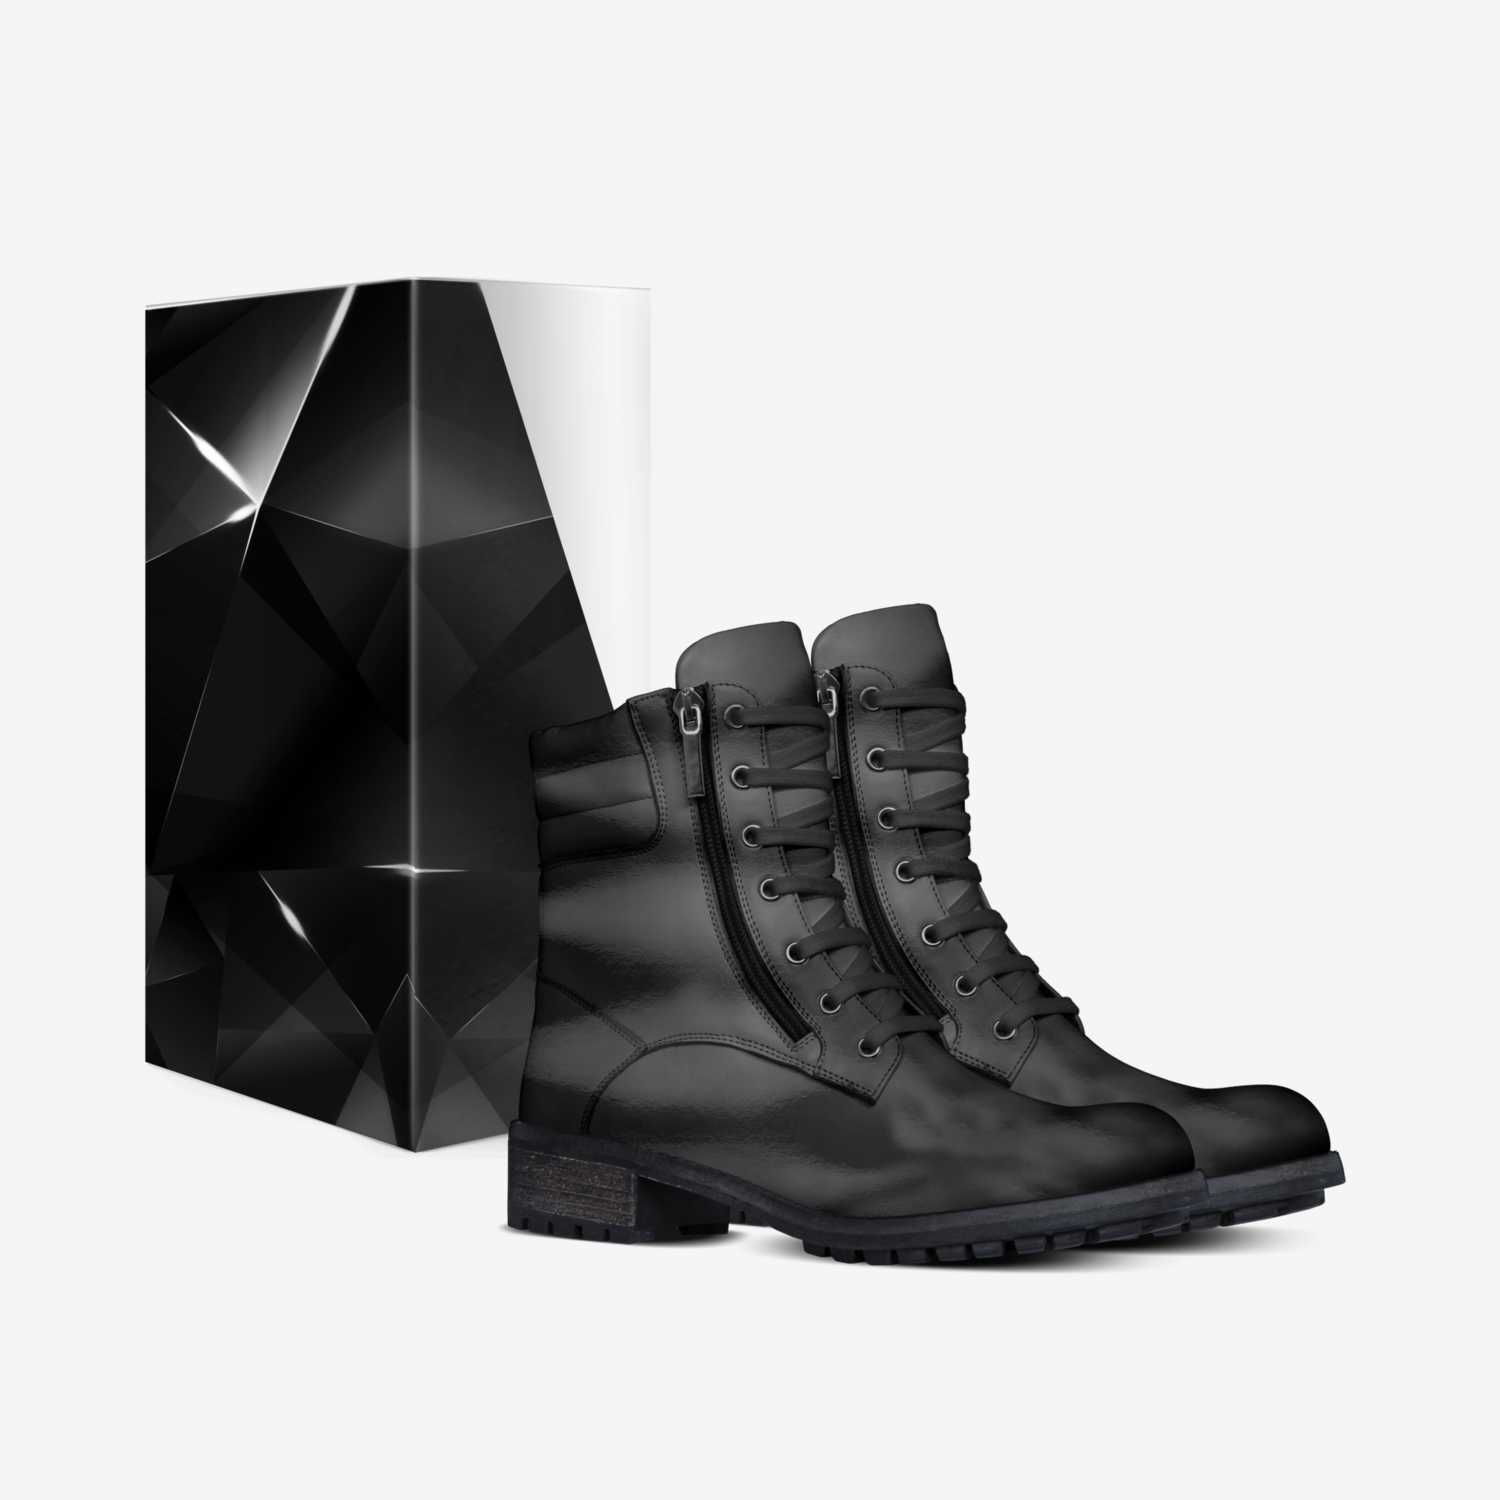 HE MILITARY BOOT custom made in Italy shoes by Bj Min | Box view